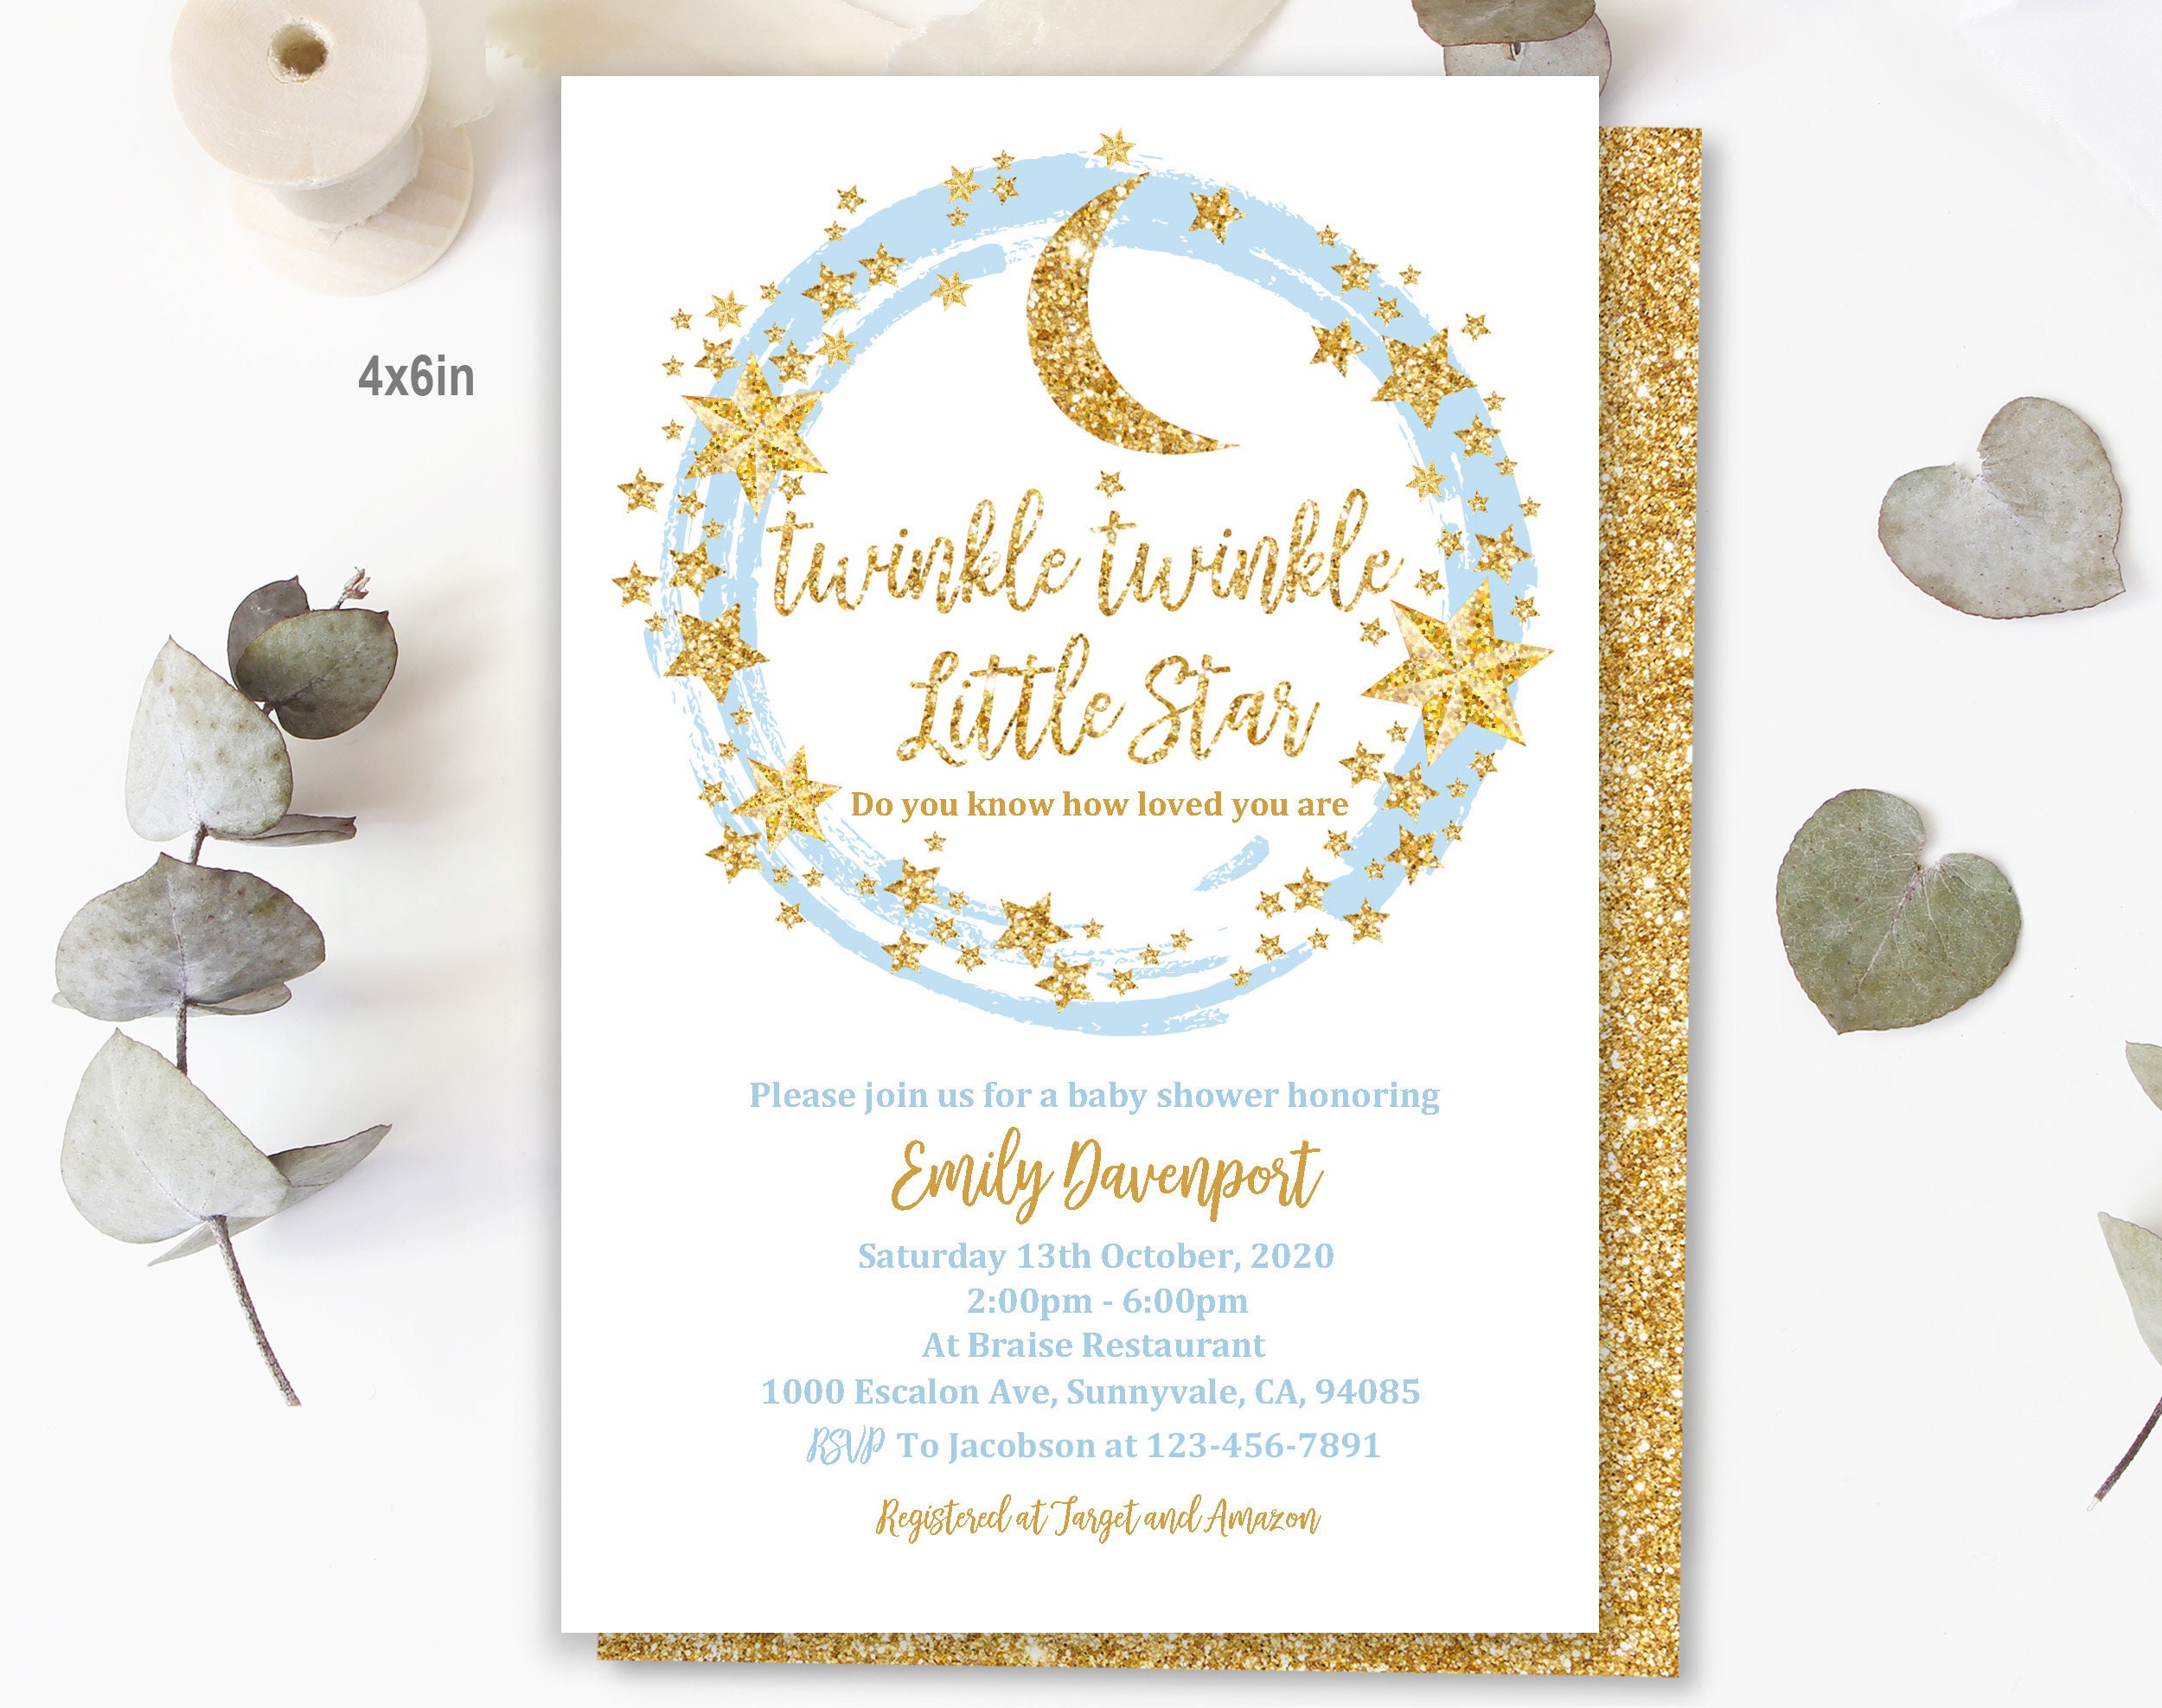 NAVY AND GOLD TWINKLE TWINKLE LITTLE STAR FIRST BIRTHDAY PARTY WITH CRICUT